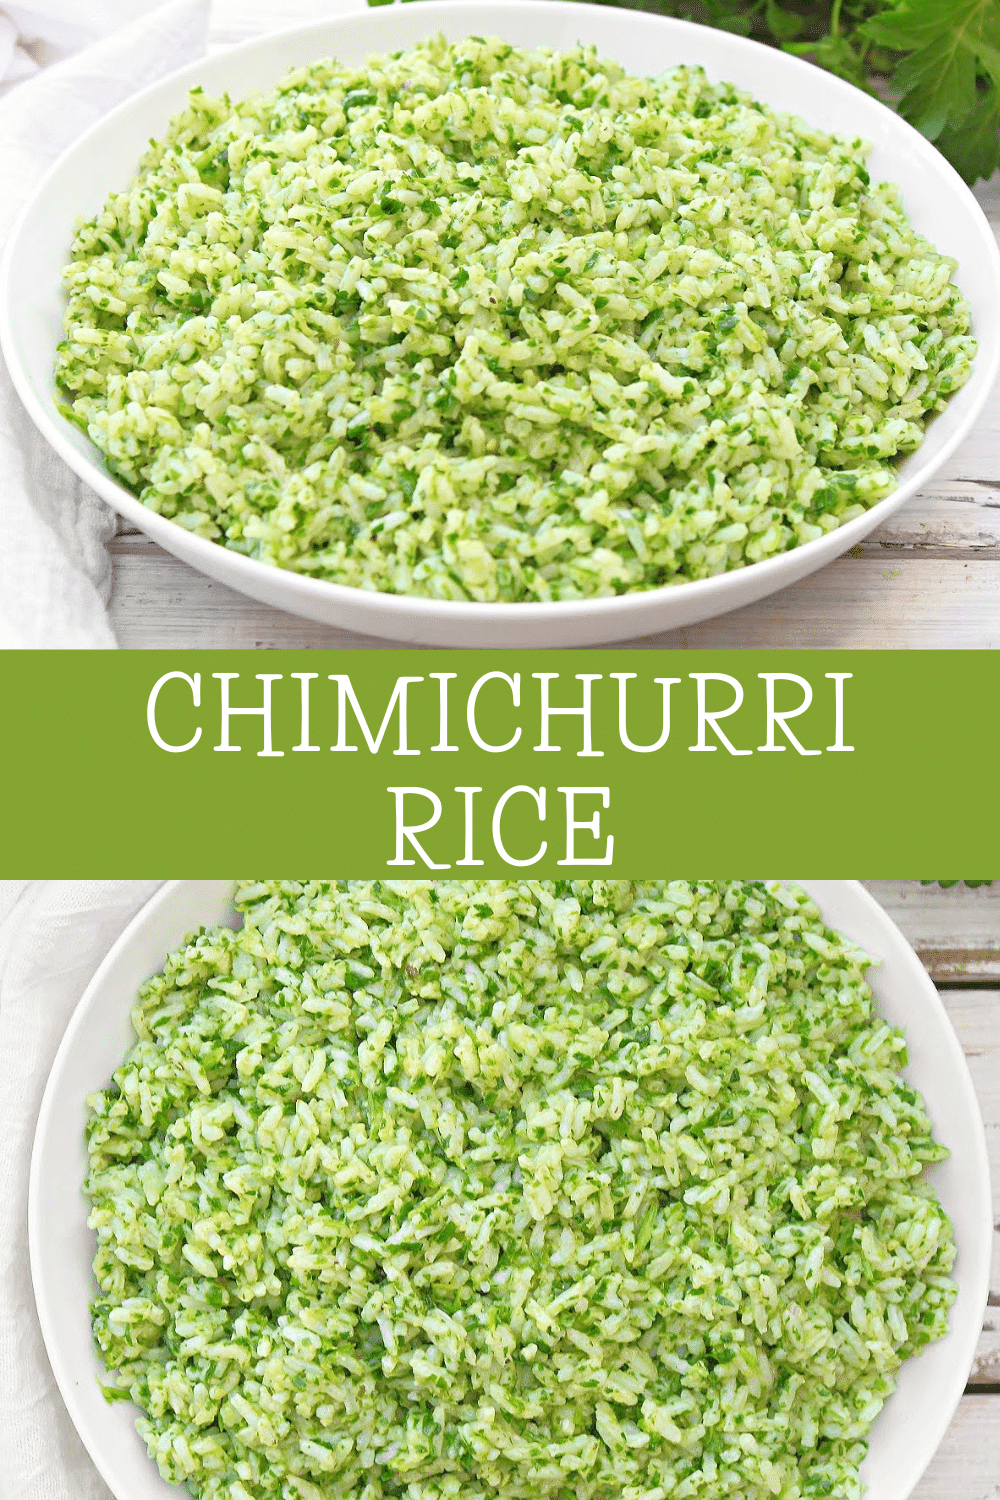 Chimichurri Rice ~ Fluffy rice with homemade chimichurri sauce - simple ingredients that bring a taste of South America to the table! via @thiswifecooks